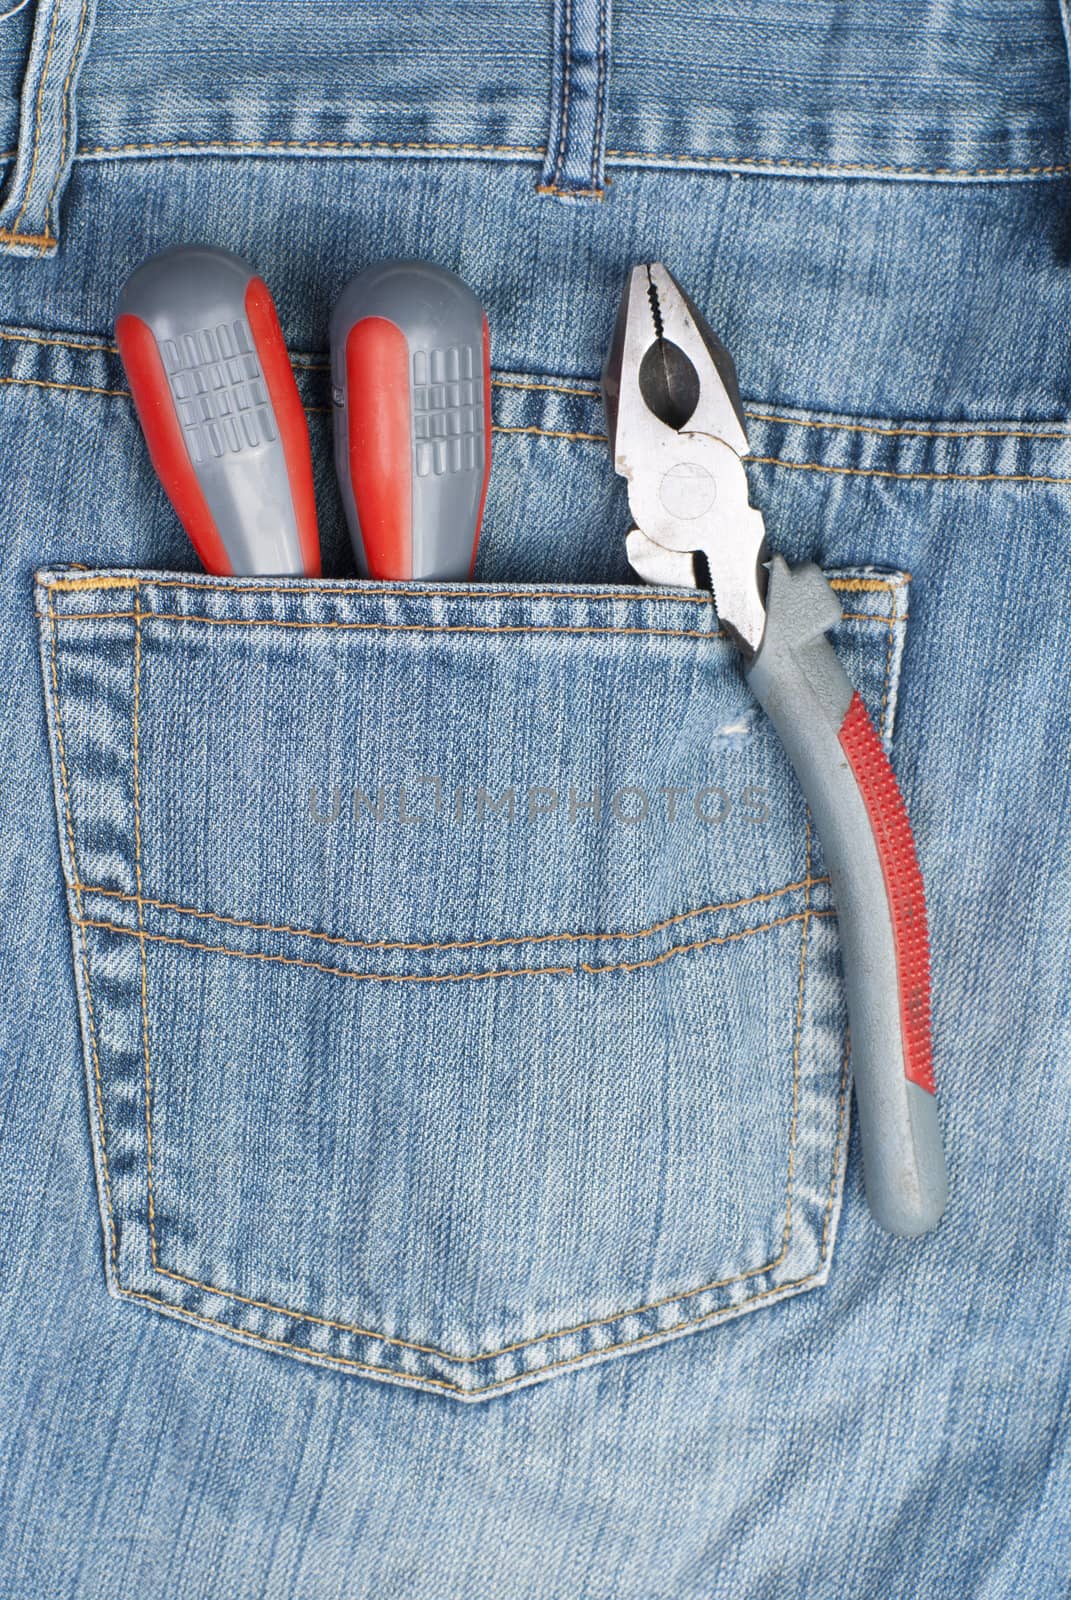 two screwdriver and pliers in the pocket of jeans